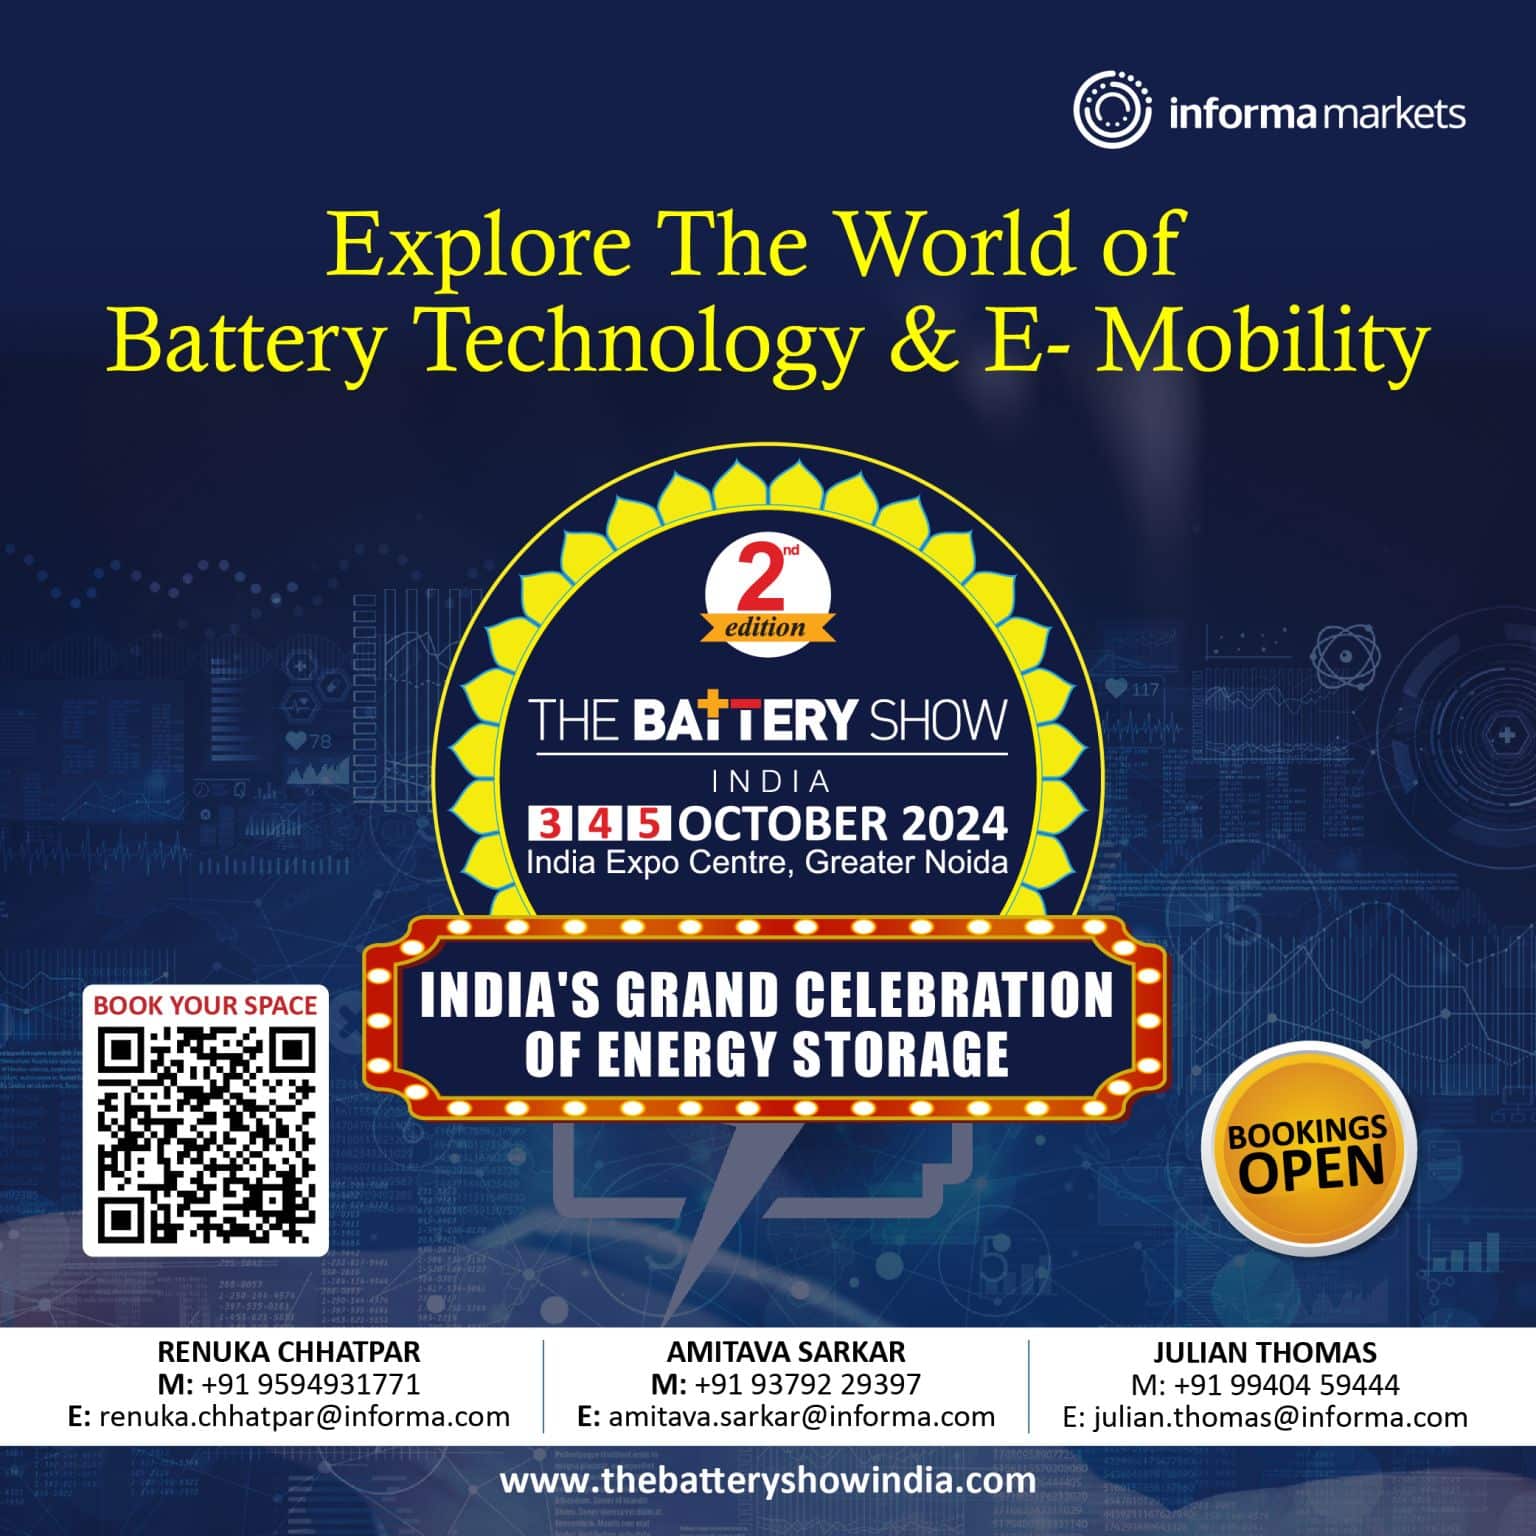 The Battery Show India 2024